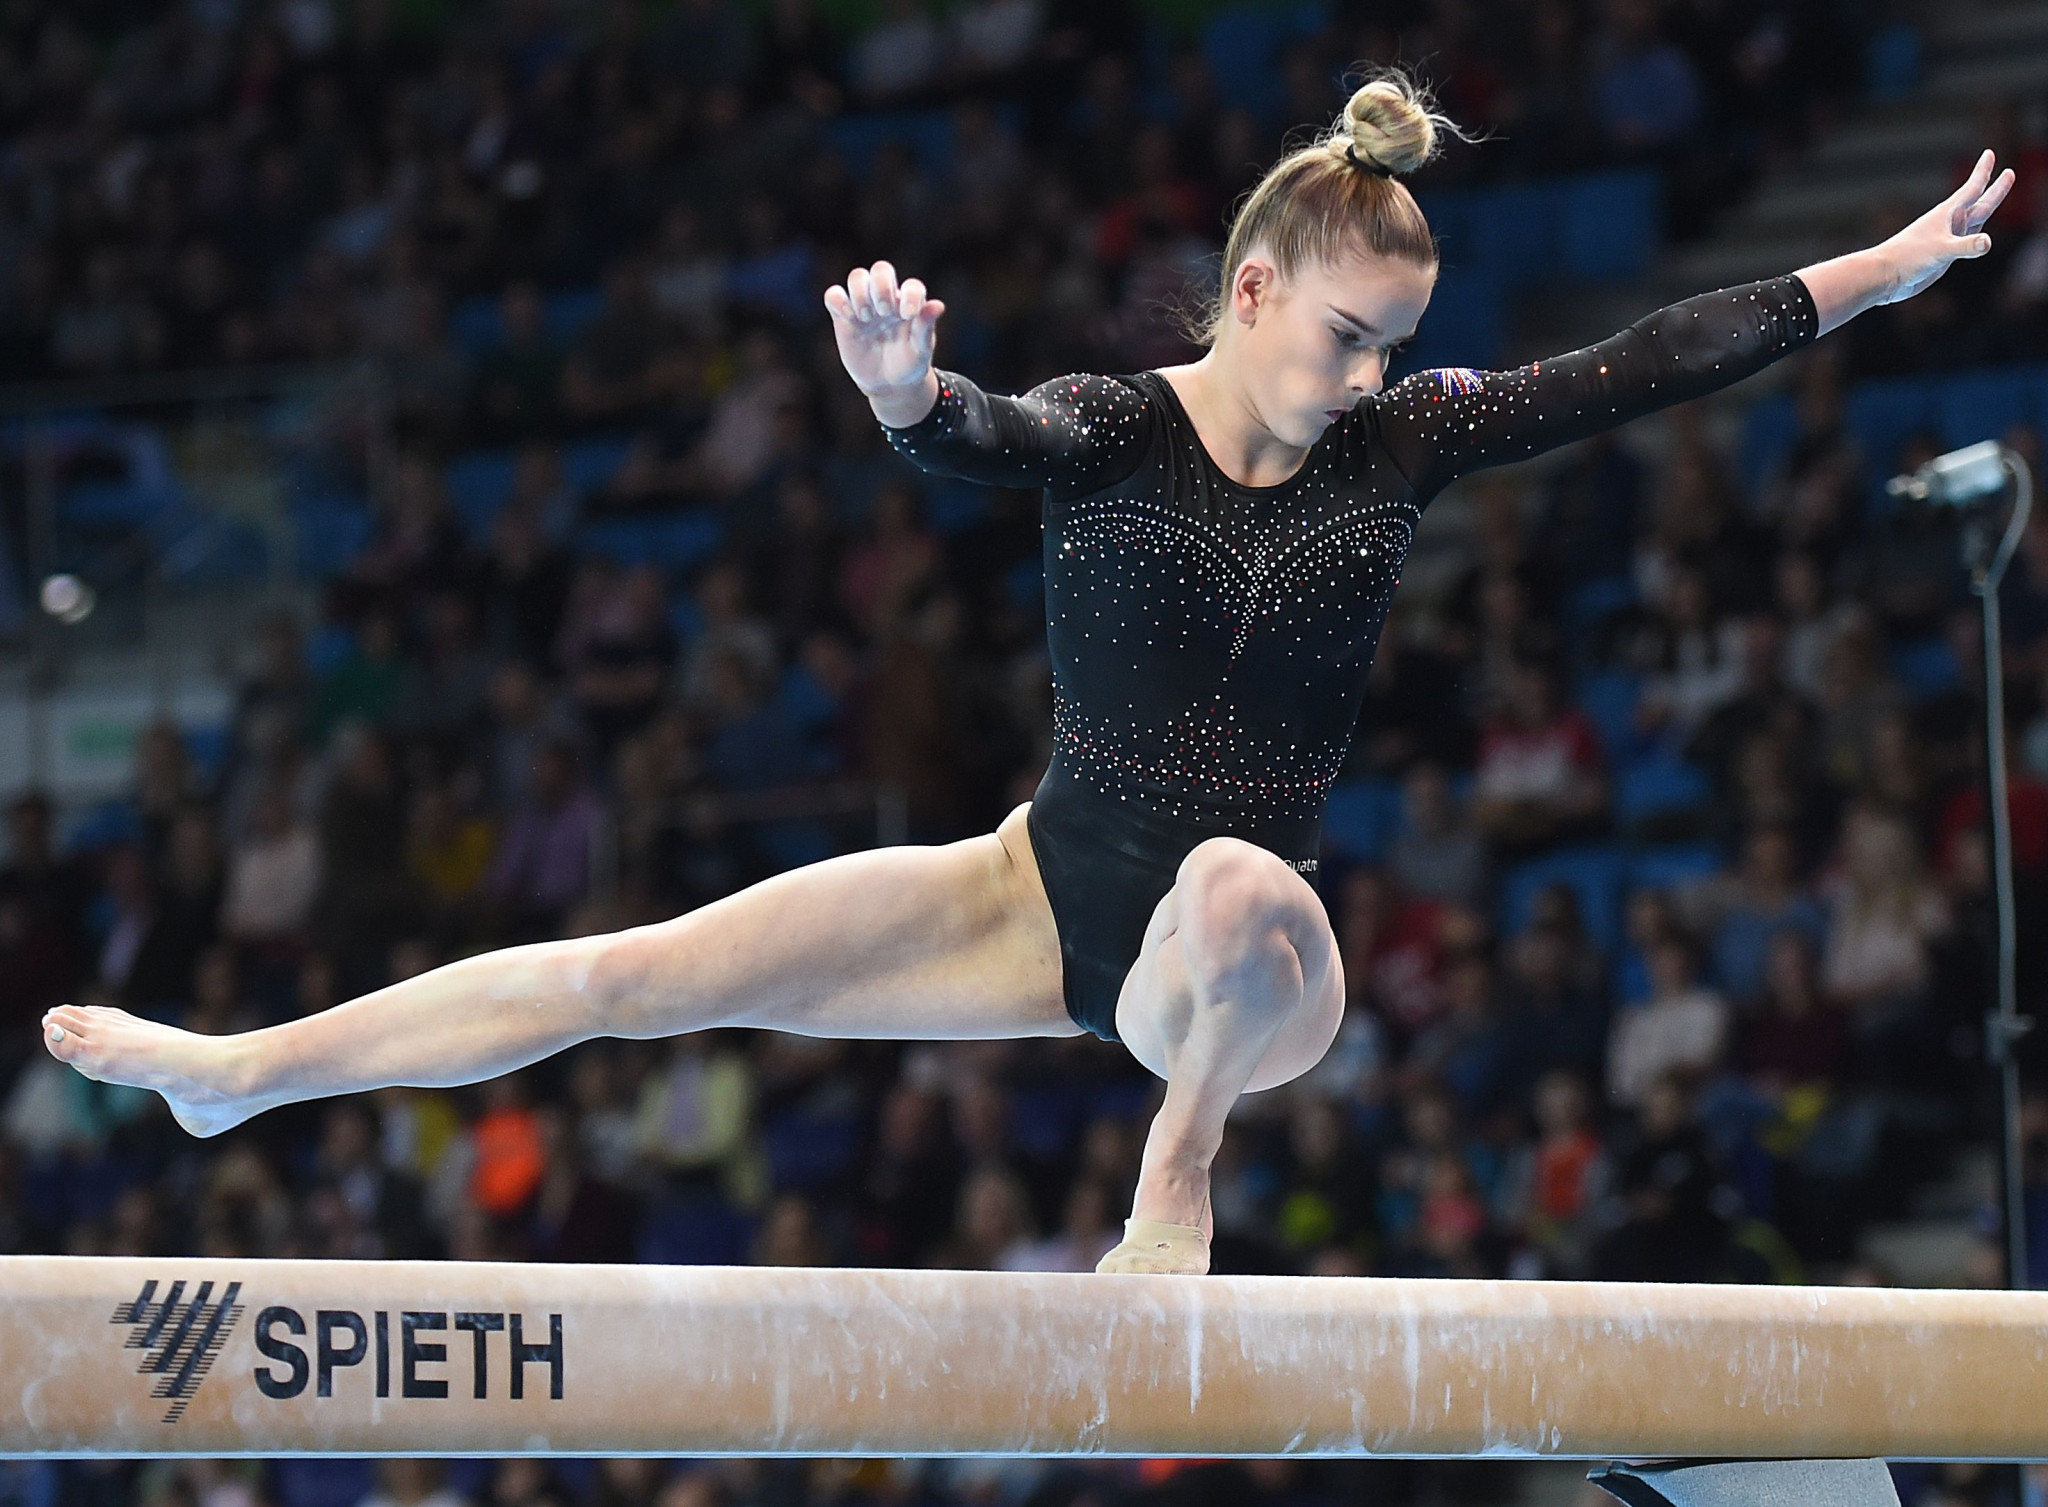 Britain's Alice Kinsella was one of the gold medallists at last year's European Artistic Gymnastics Championships ©Getty Images